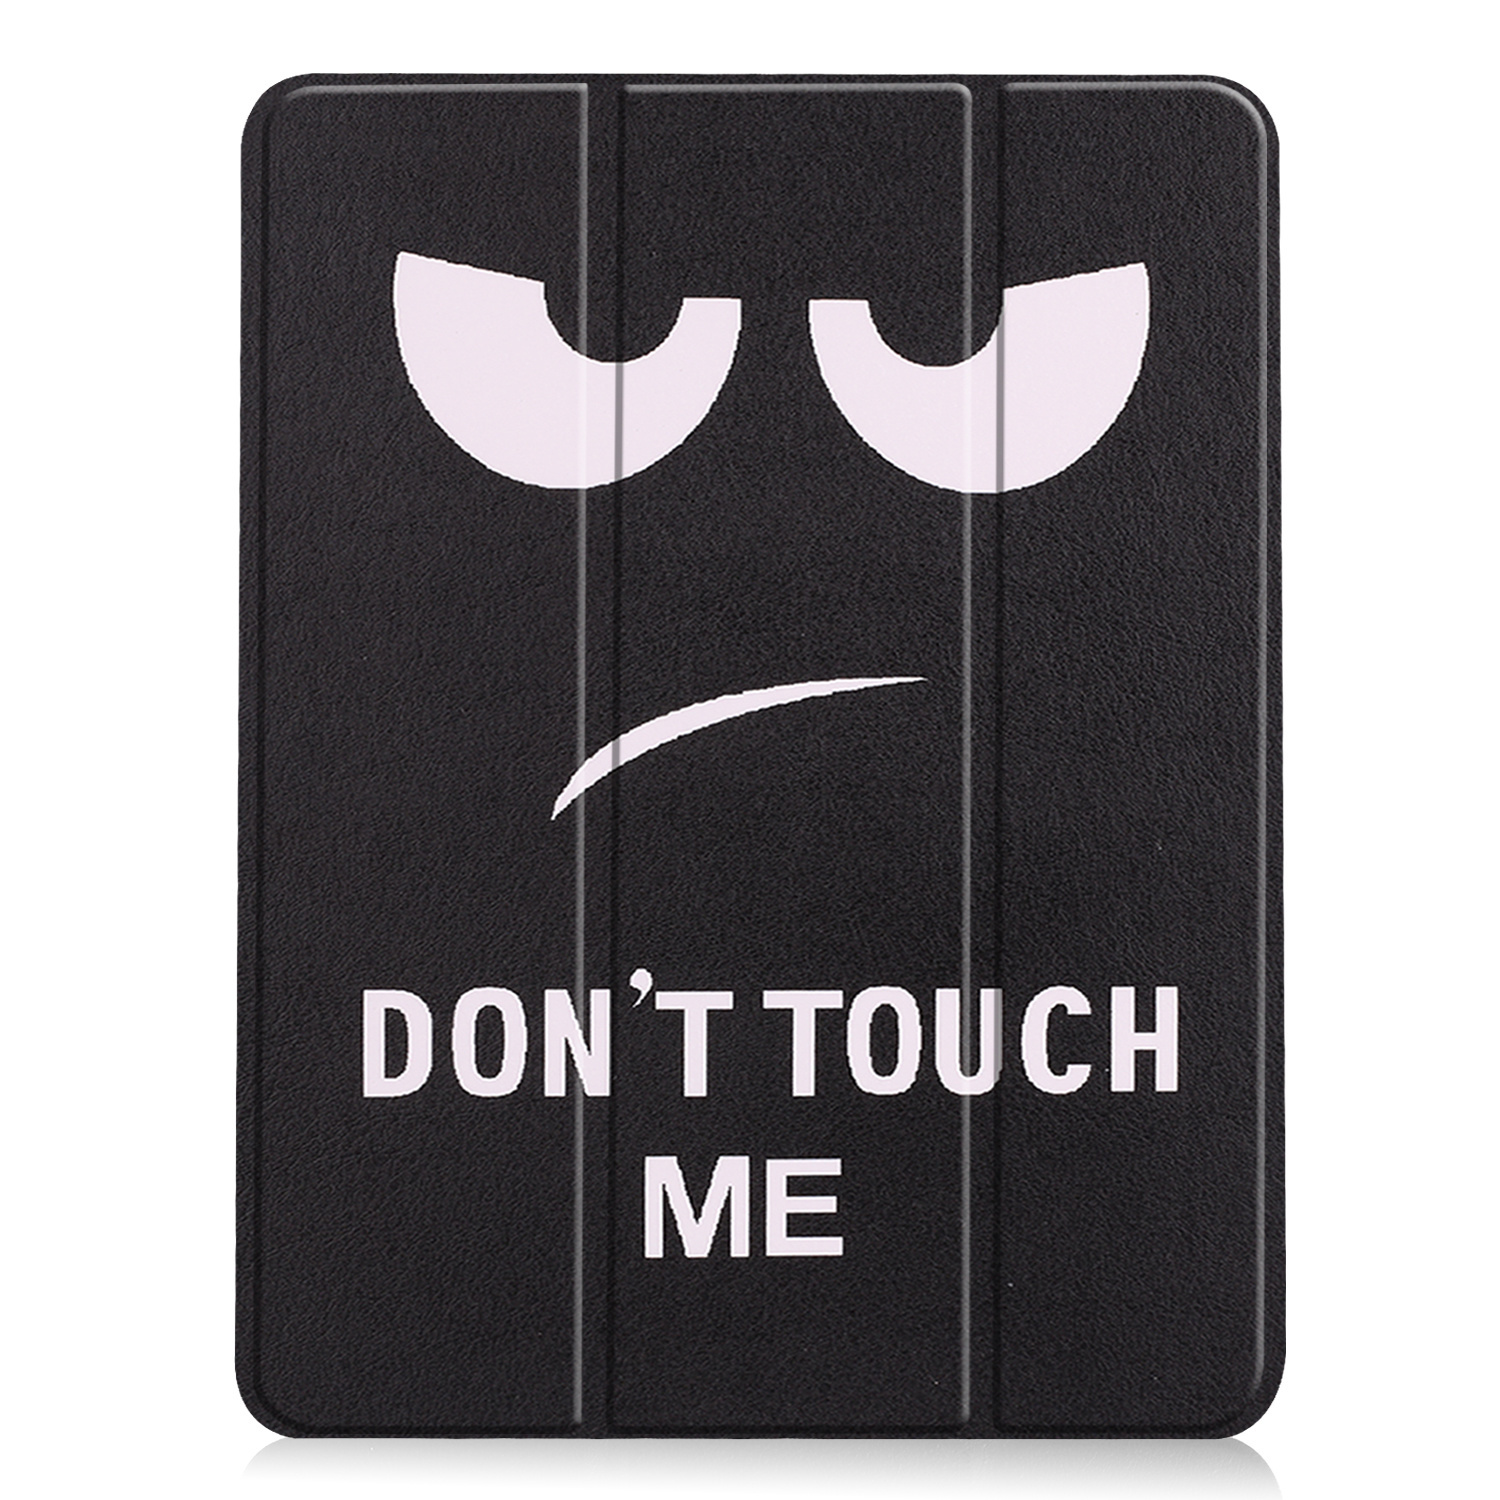 BASEY. iPad Air 5 2022 Hoes Met Screenprotector Don't Touch Me - iPad Air 5 2022 Hoesje Uitsparing Apple Pencil Hard Cover Don't Touch Me - iPad Air 5 2022 Bookcase Hoes Don't Touch Me